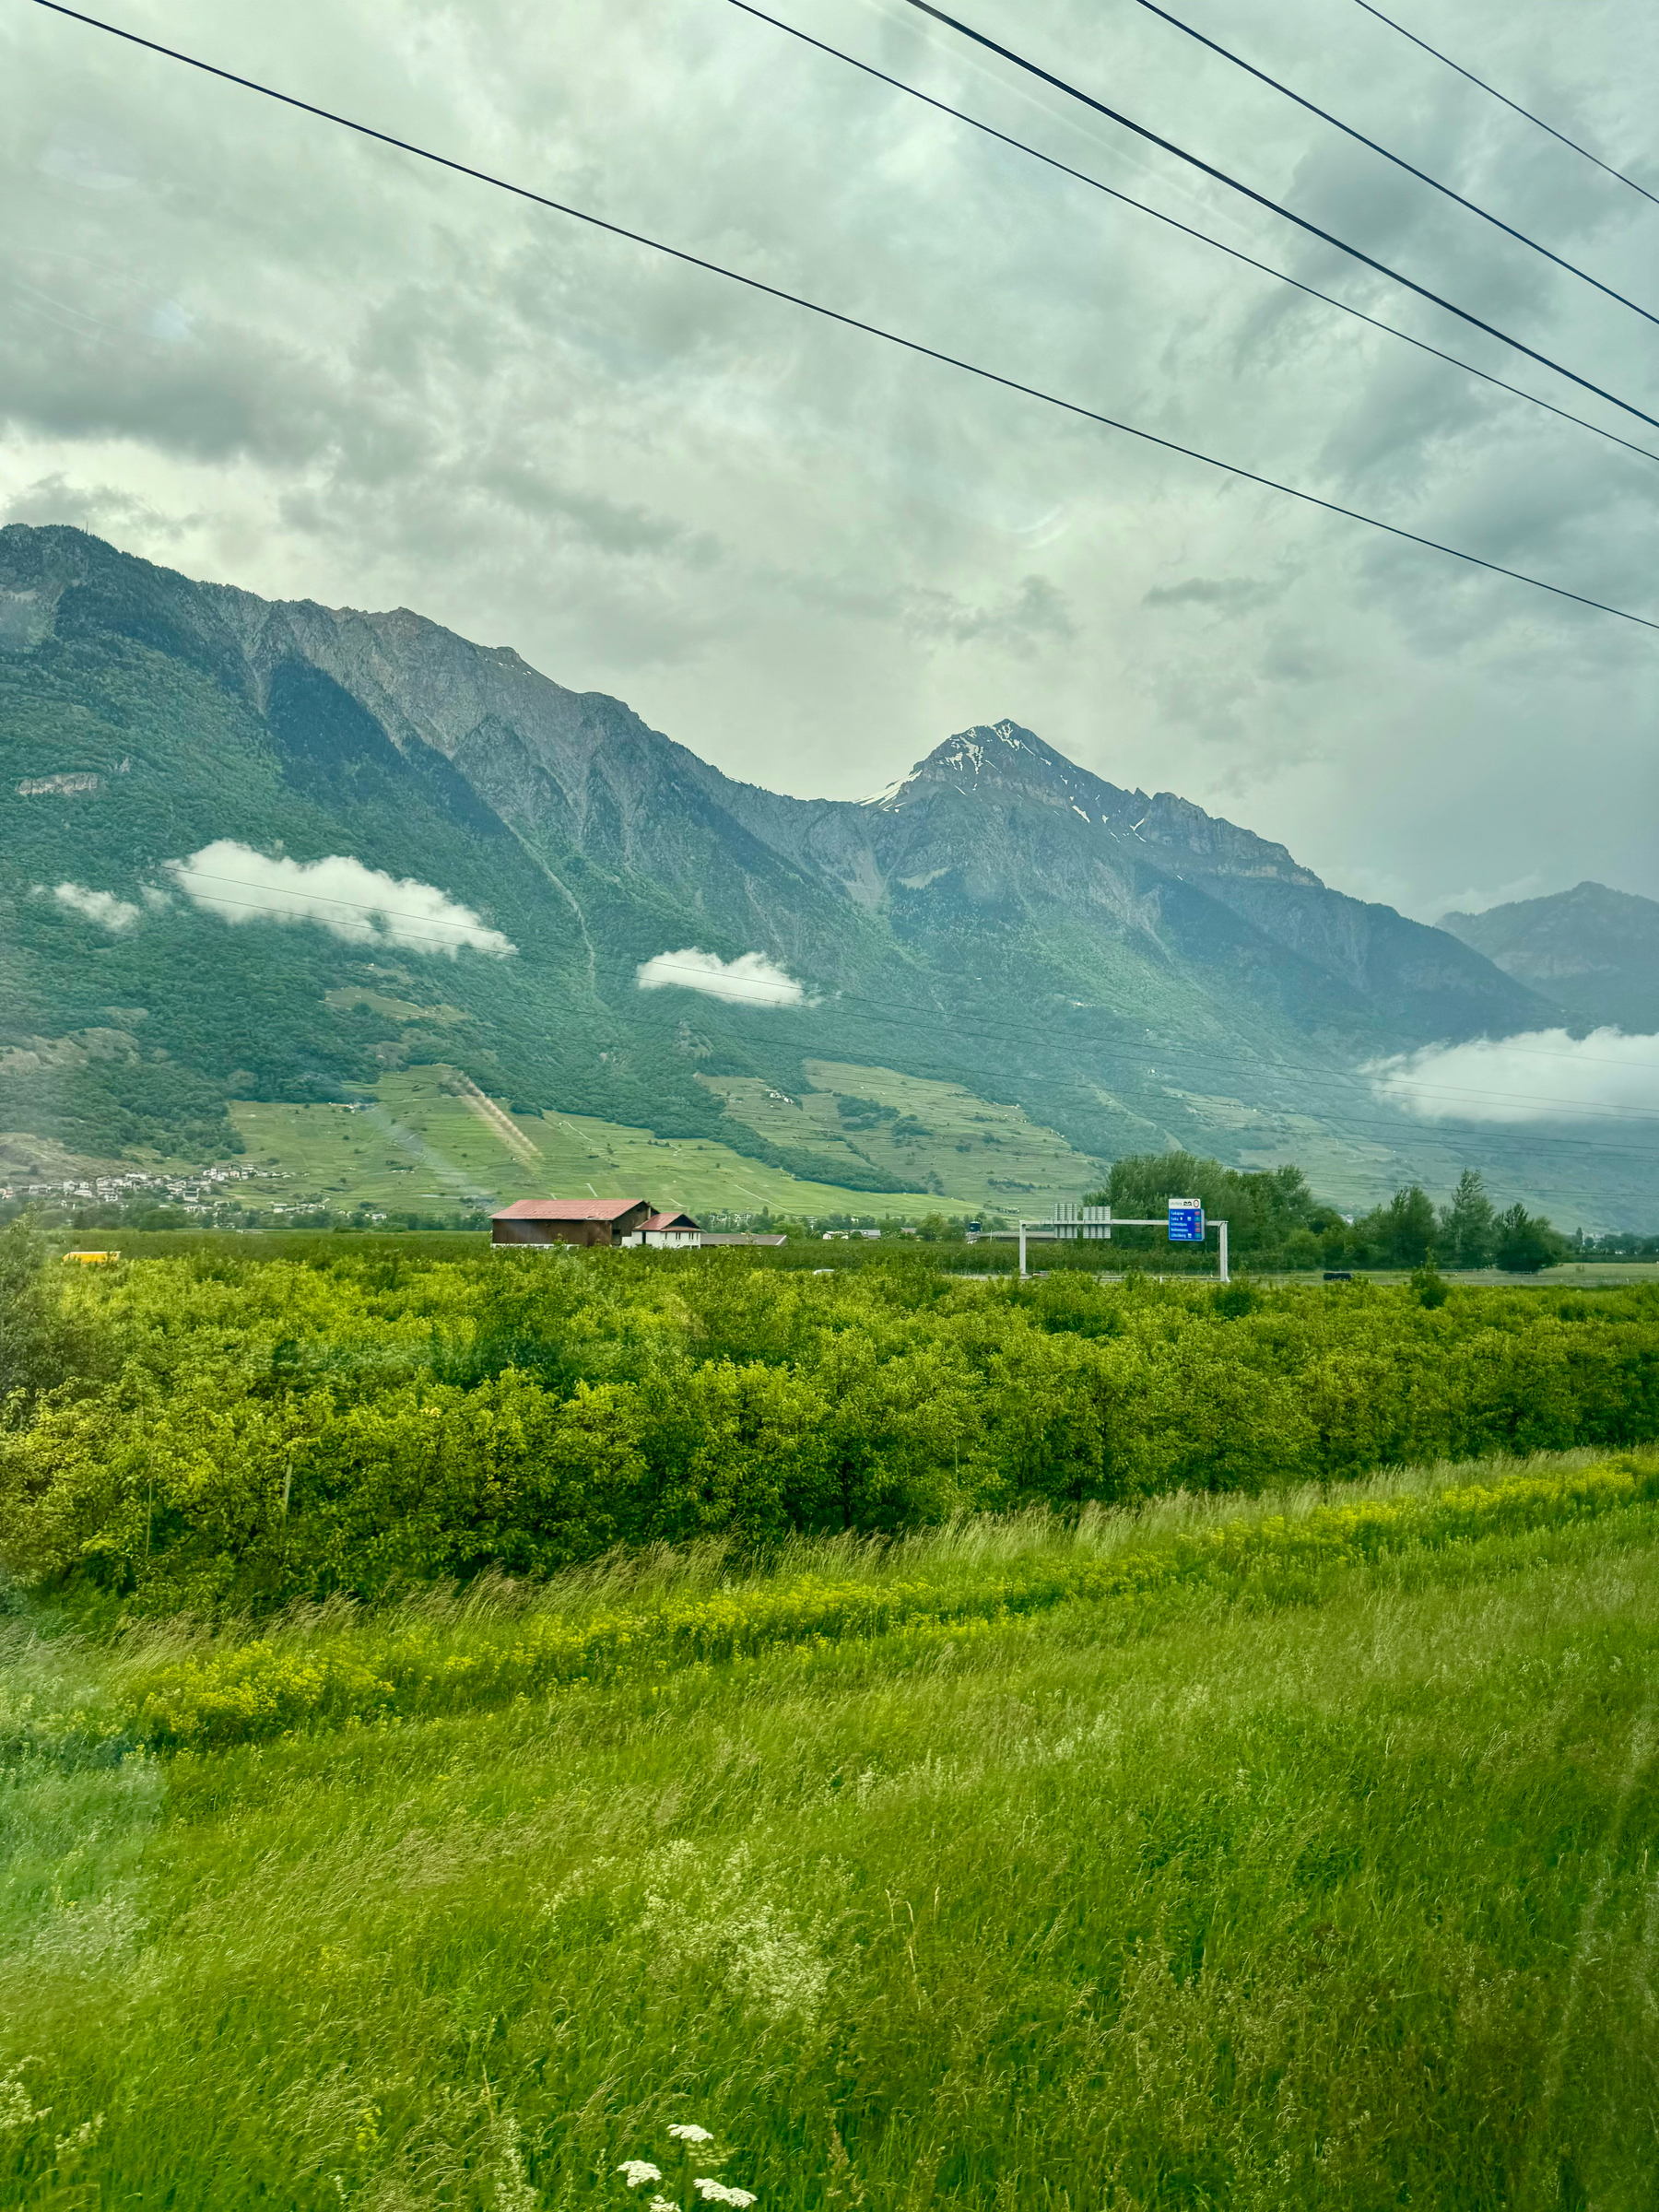 A verdant landscape with a solitary house, lush green fields, and a backdrop of towering, mist-shrouded mountains, partially obscured by power lines in the foreground.